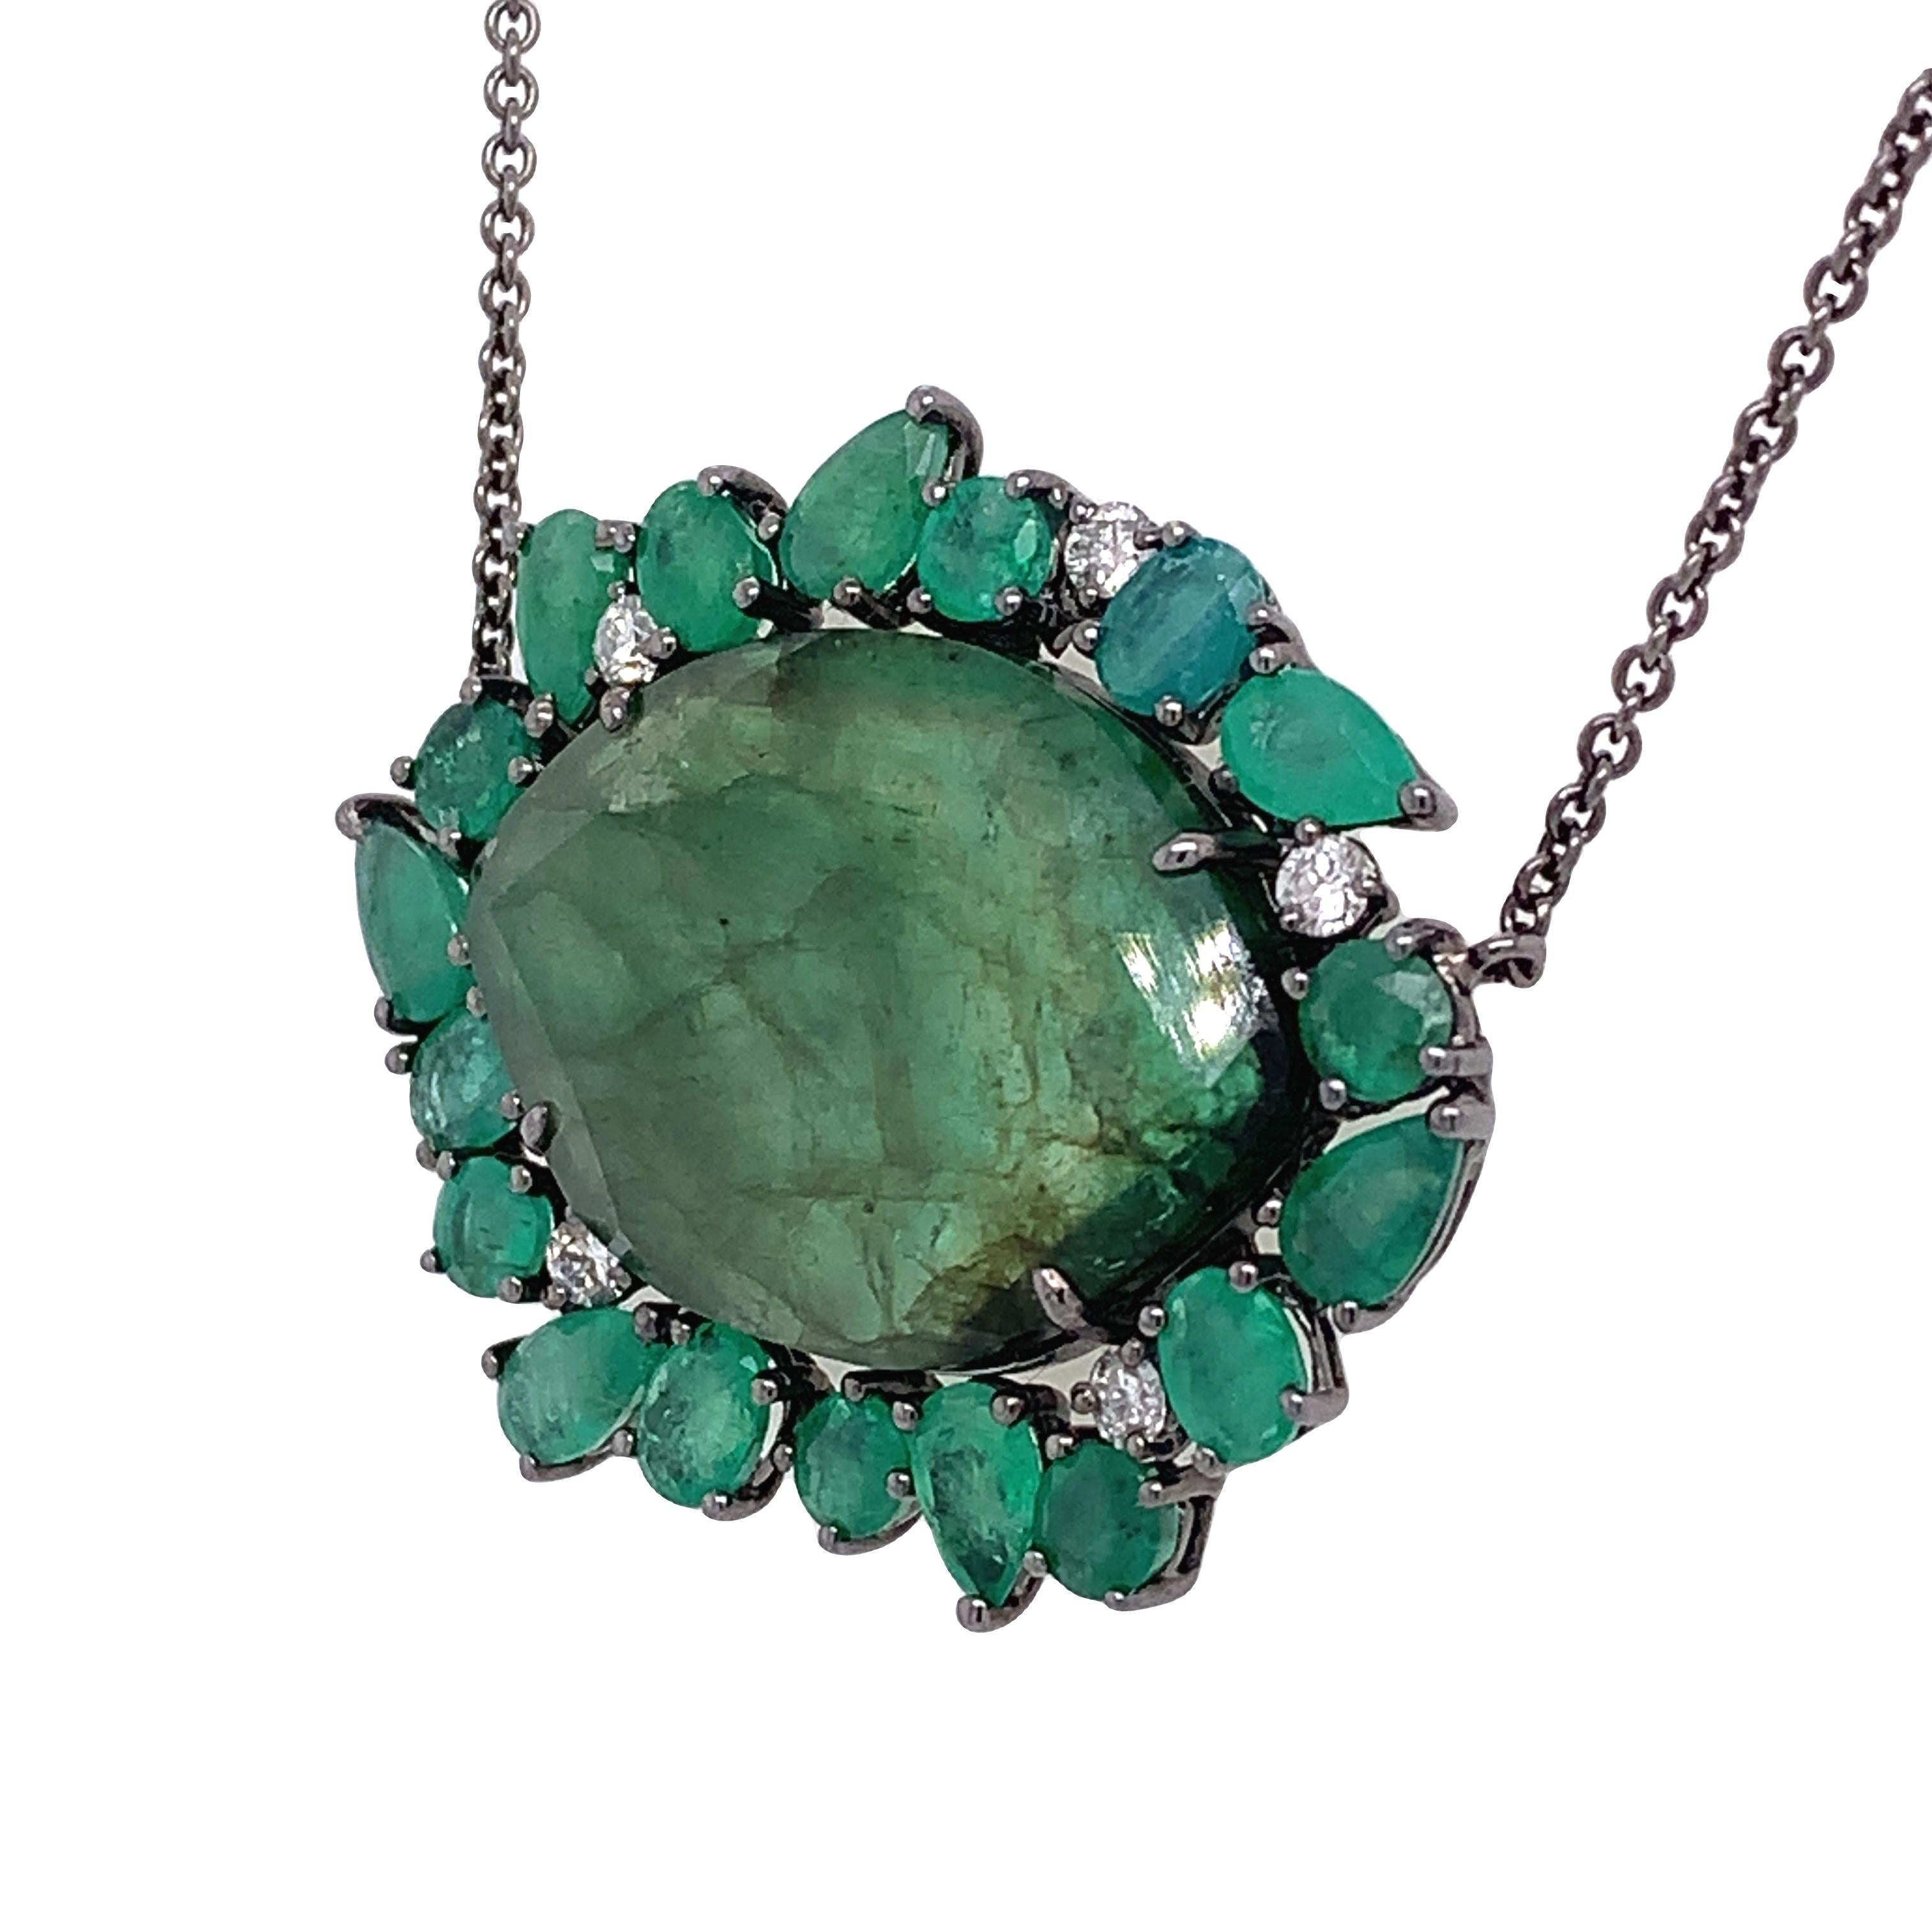 Lillipad Collection

Natural green Slice Emerald surrounded by several shape of cute Emeralds with diamonds feature as pendant necklace set in 18K rhodium black gold. The chain is 18